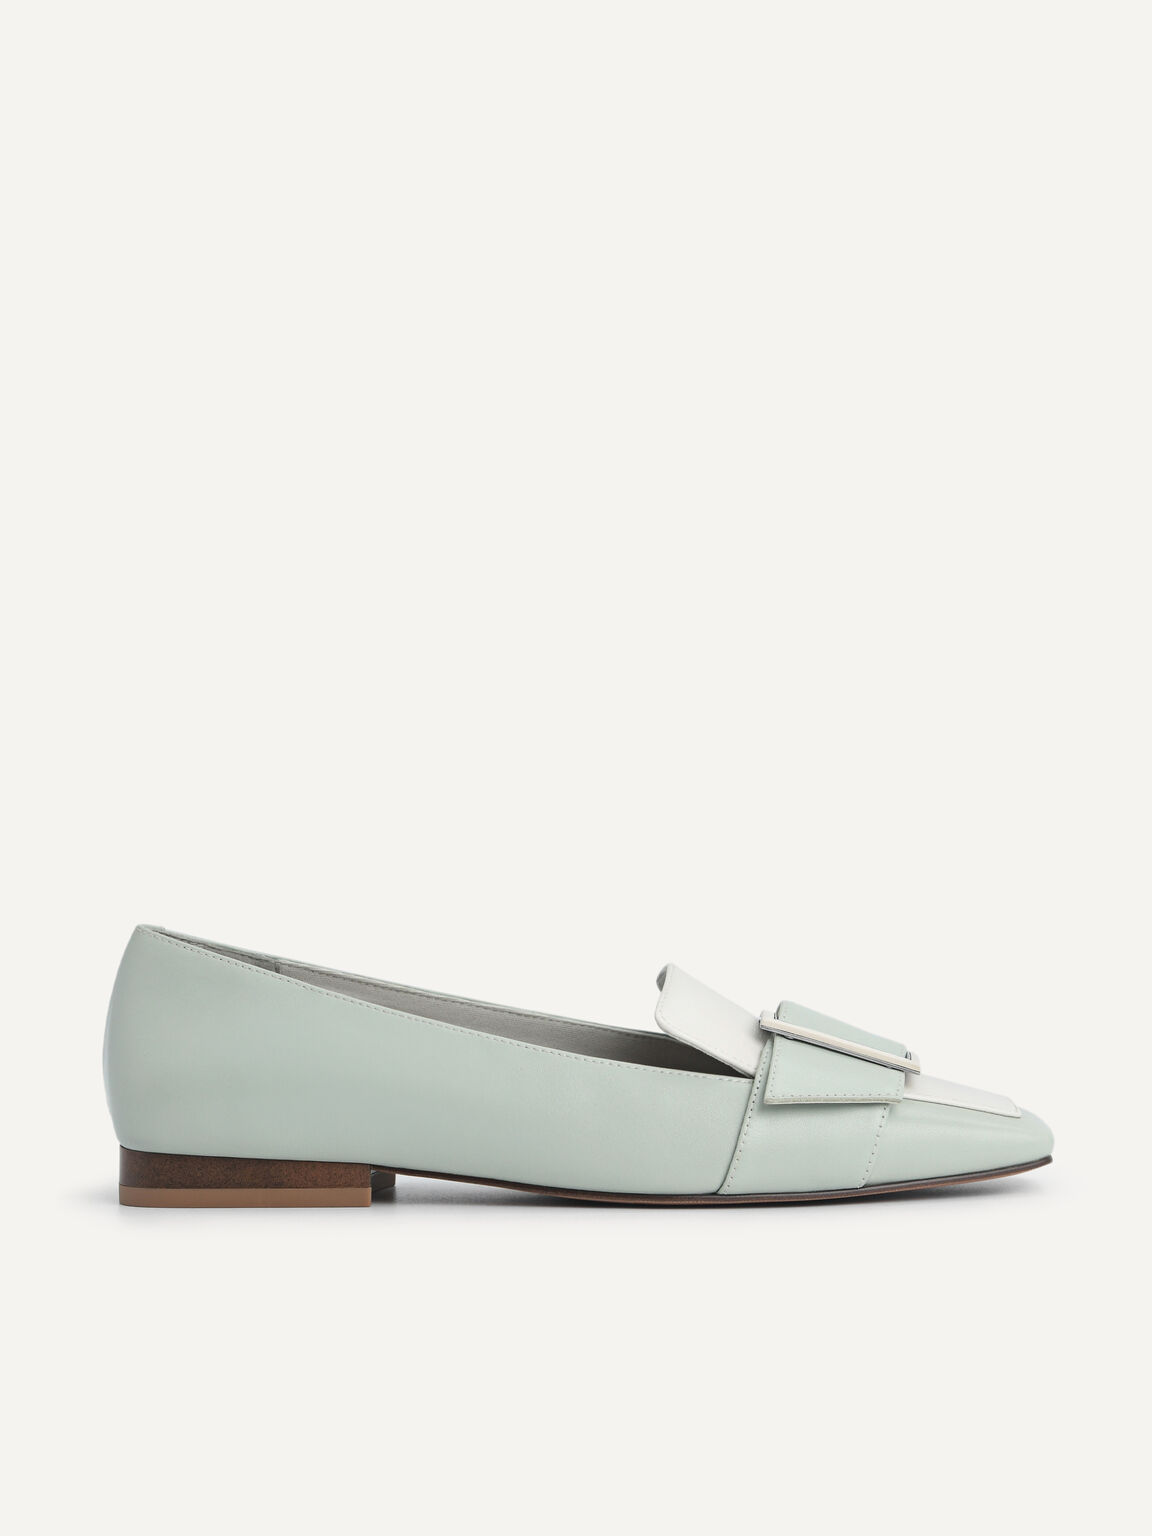 Oversized Buckle Leather Flats, Light Green